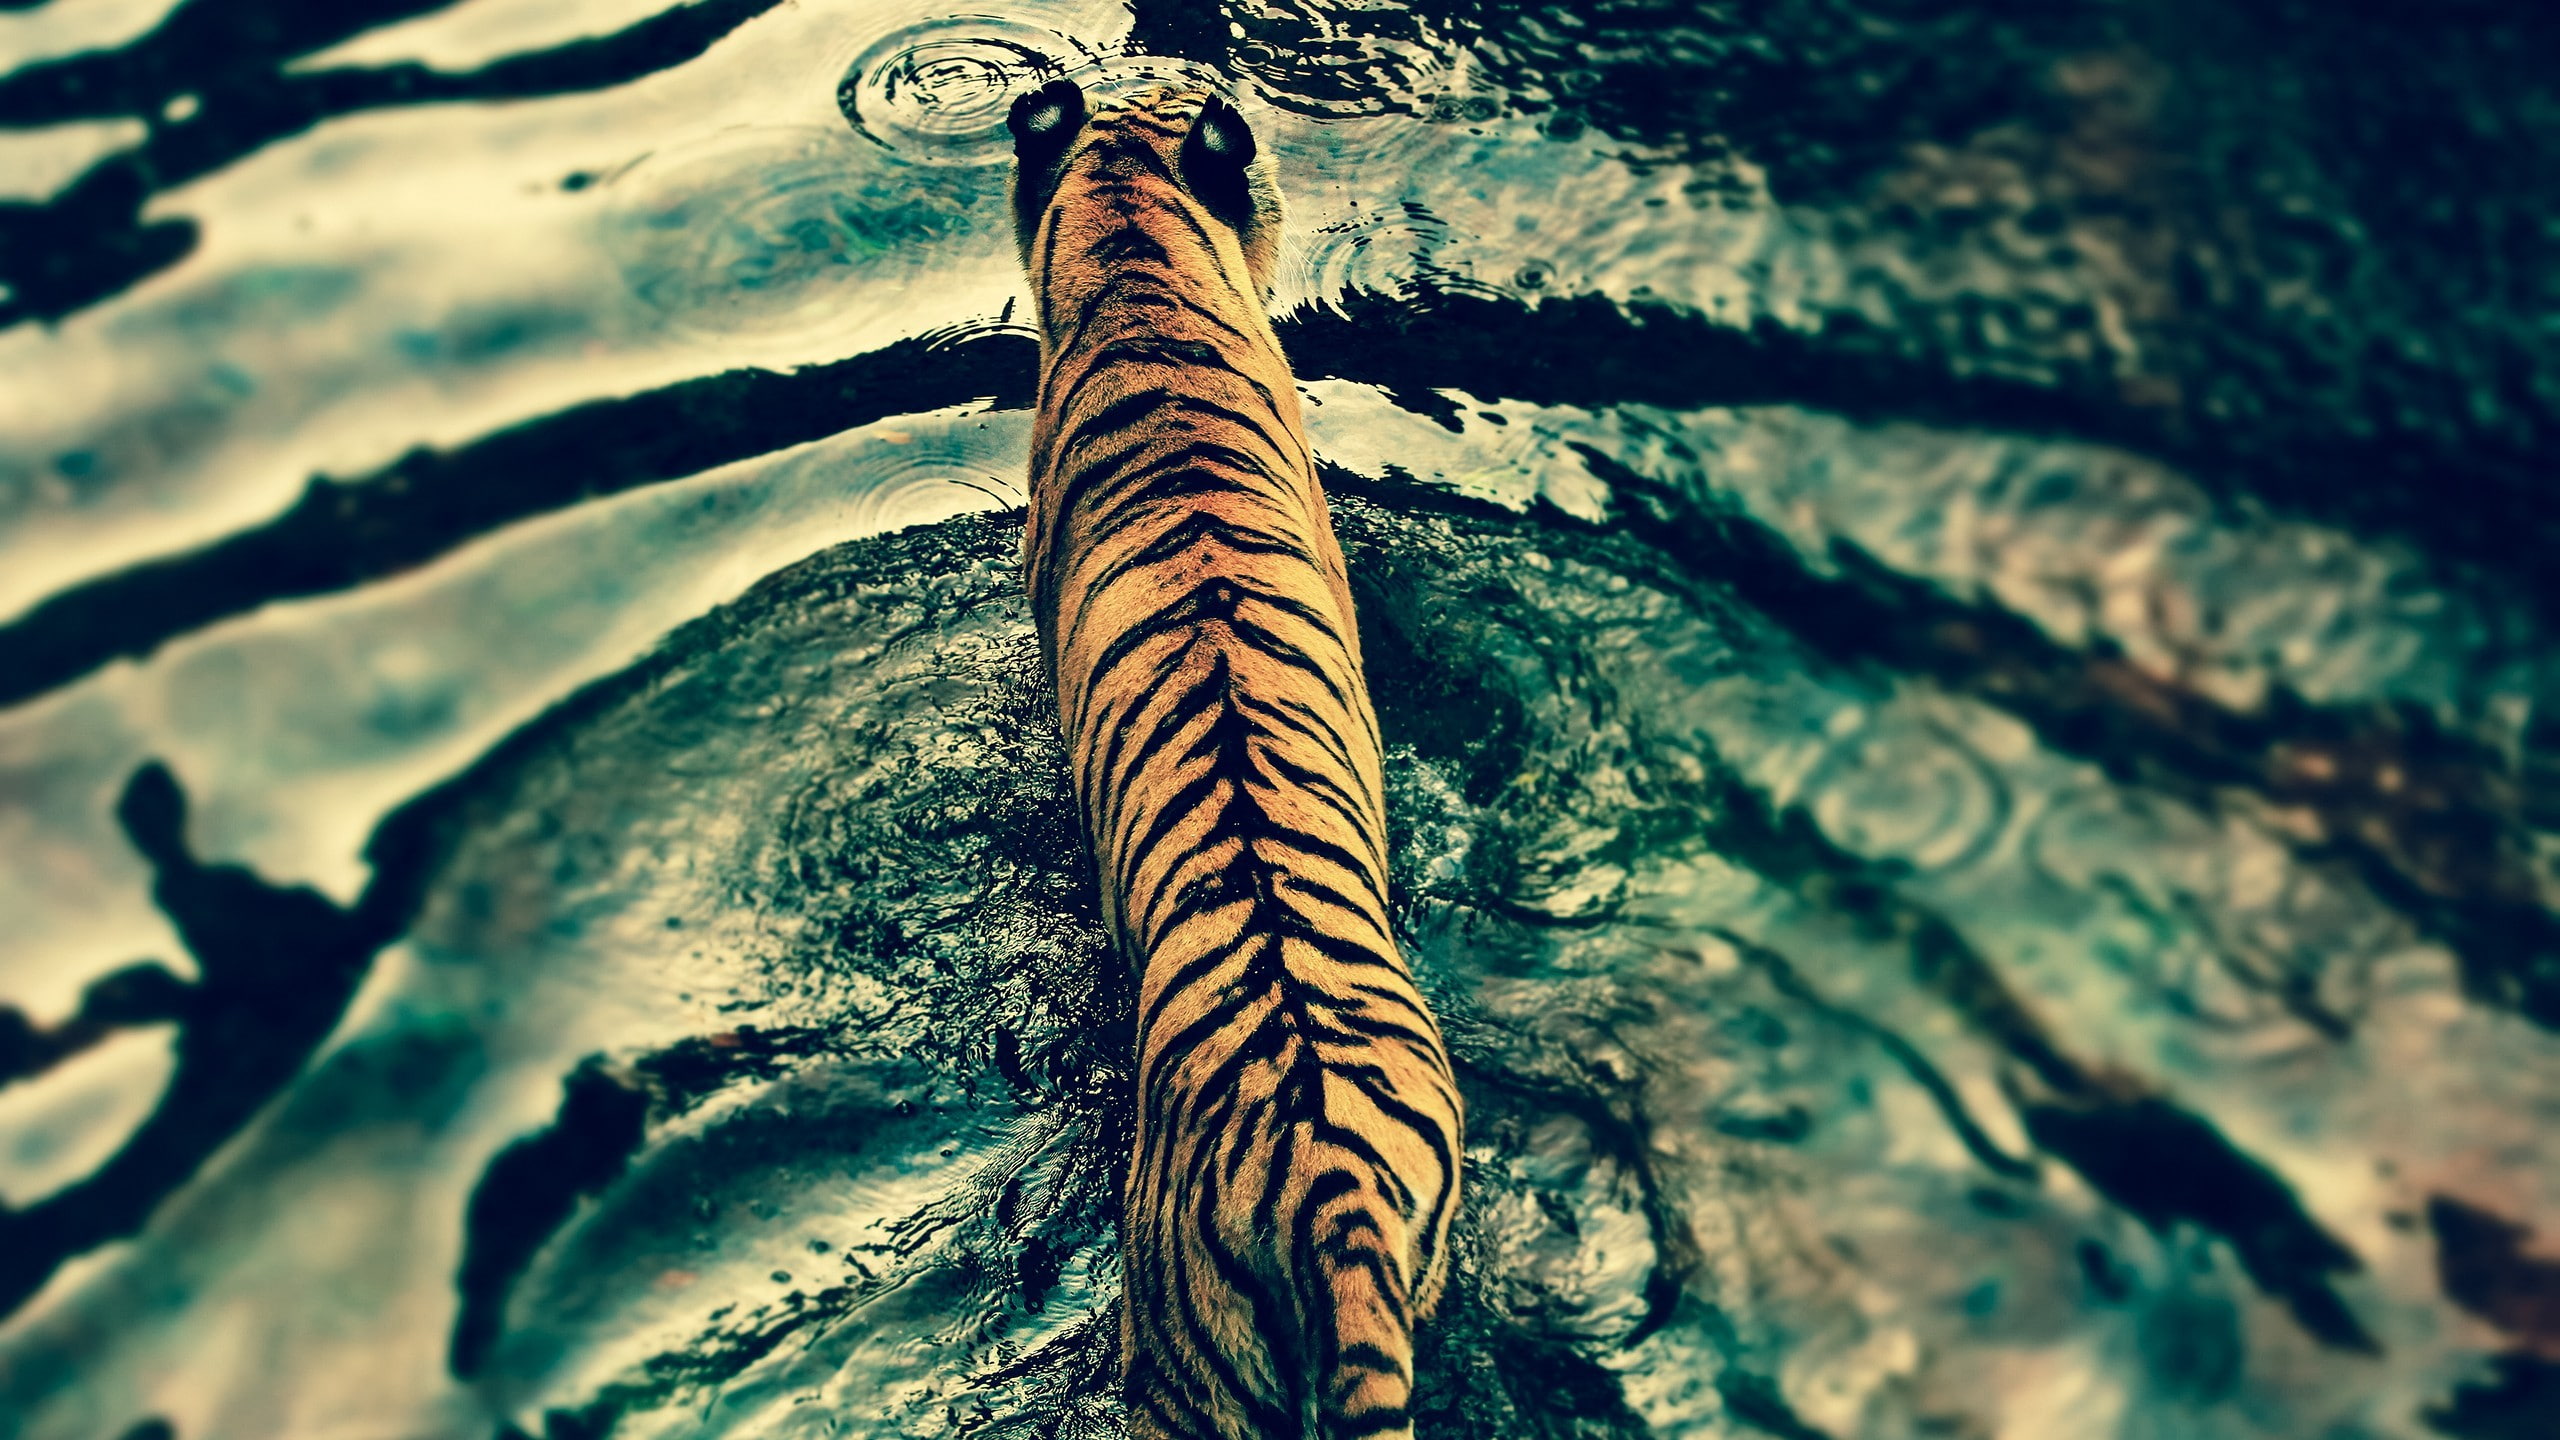 tiger, water, wildlife, no people, close-up, nature, day, textured